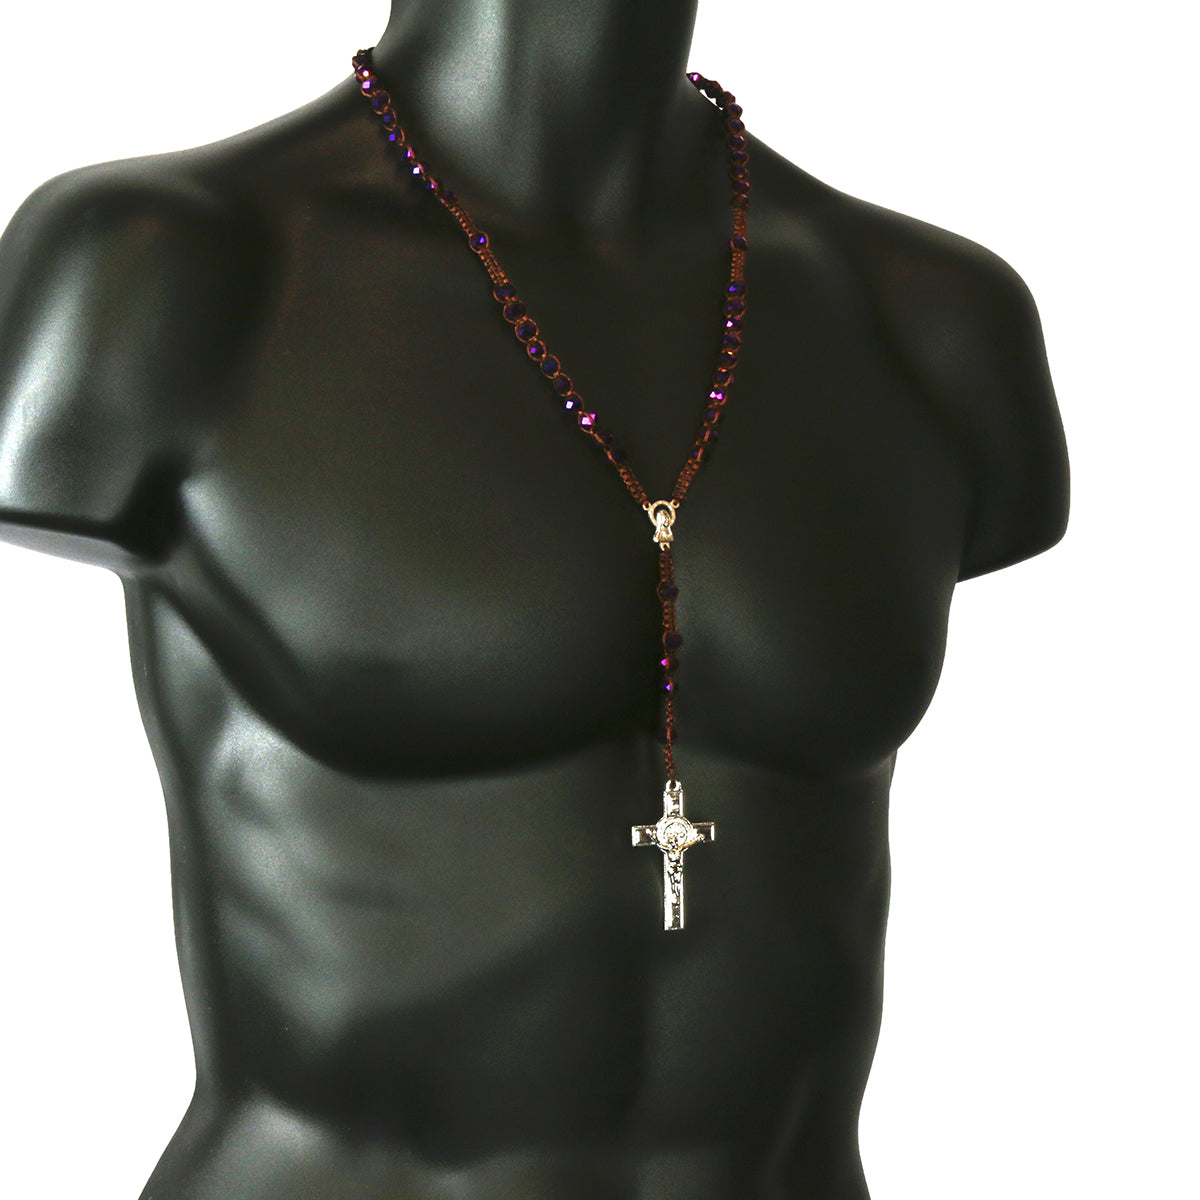 8MM Purple Crystal Fabric Rosary With Cross Pendant